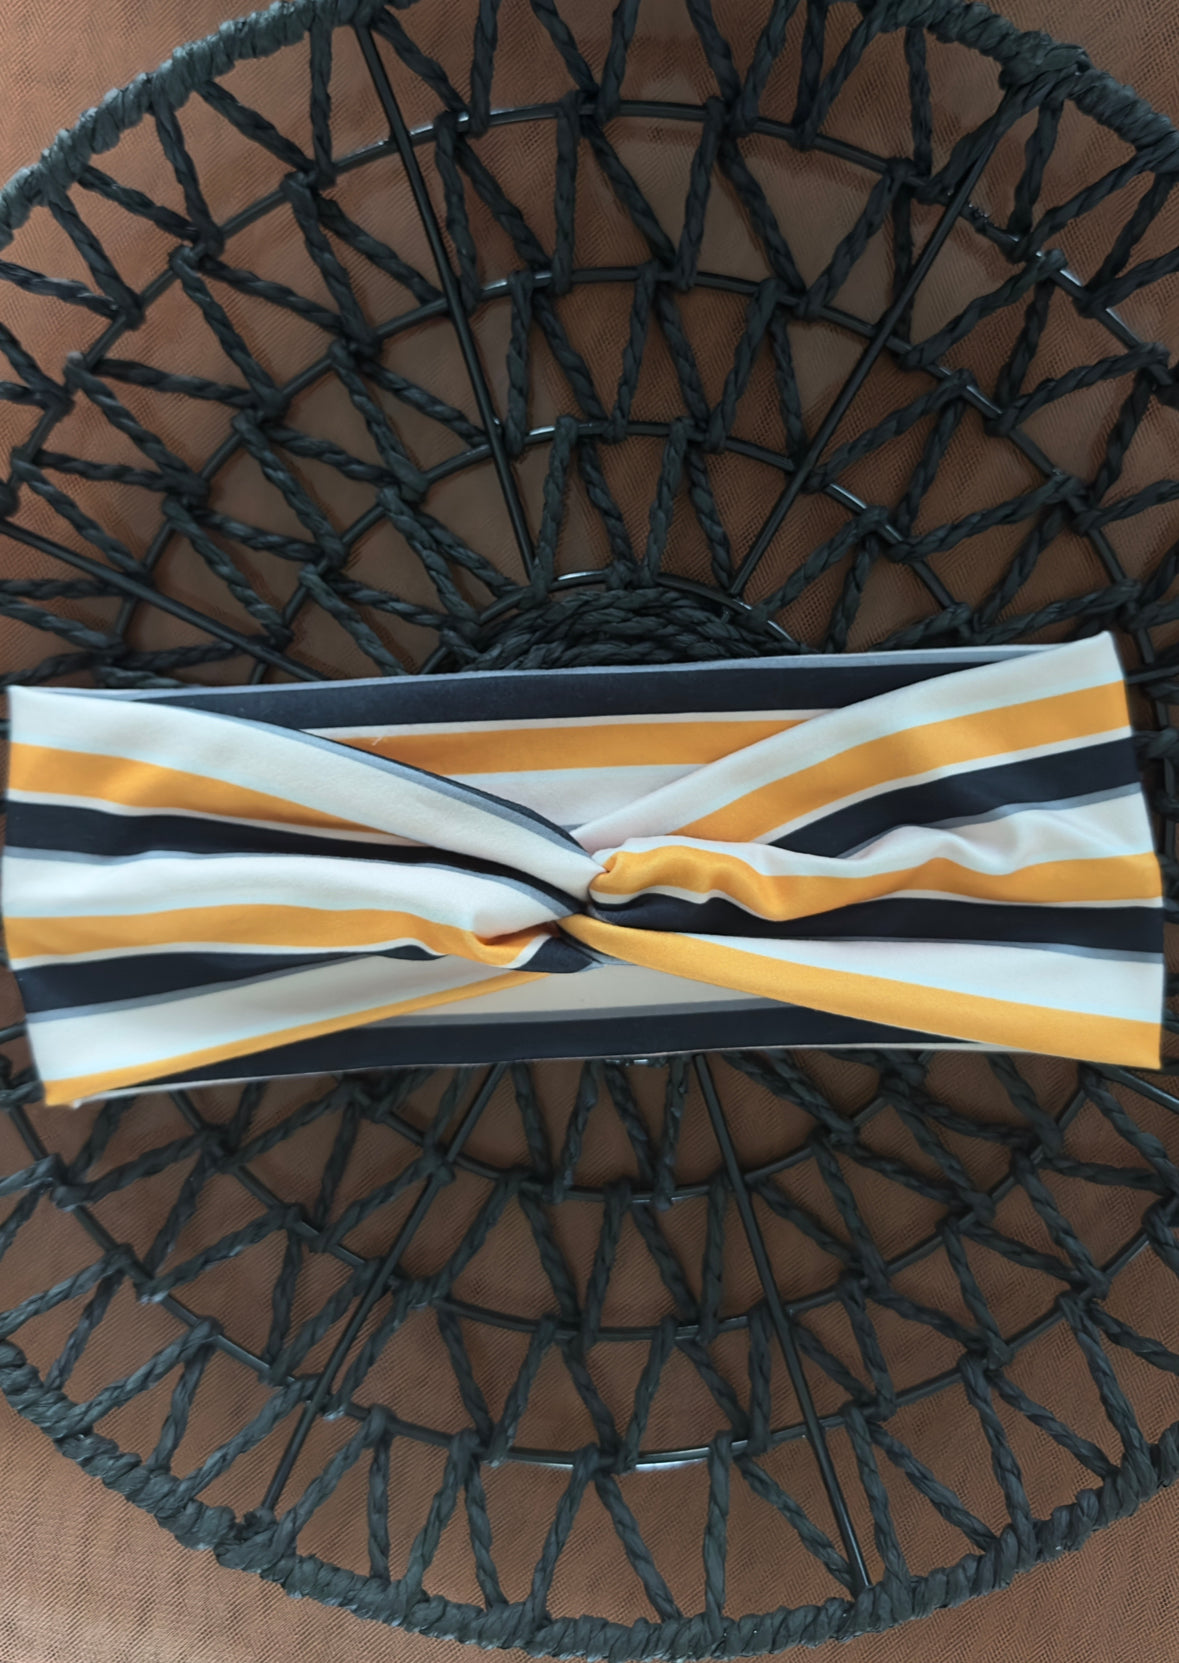 A twist headband on a black wicker tray on top of orange tulle. The headband is striped in the colors White, orange, black. The stripes are hortizontal.